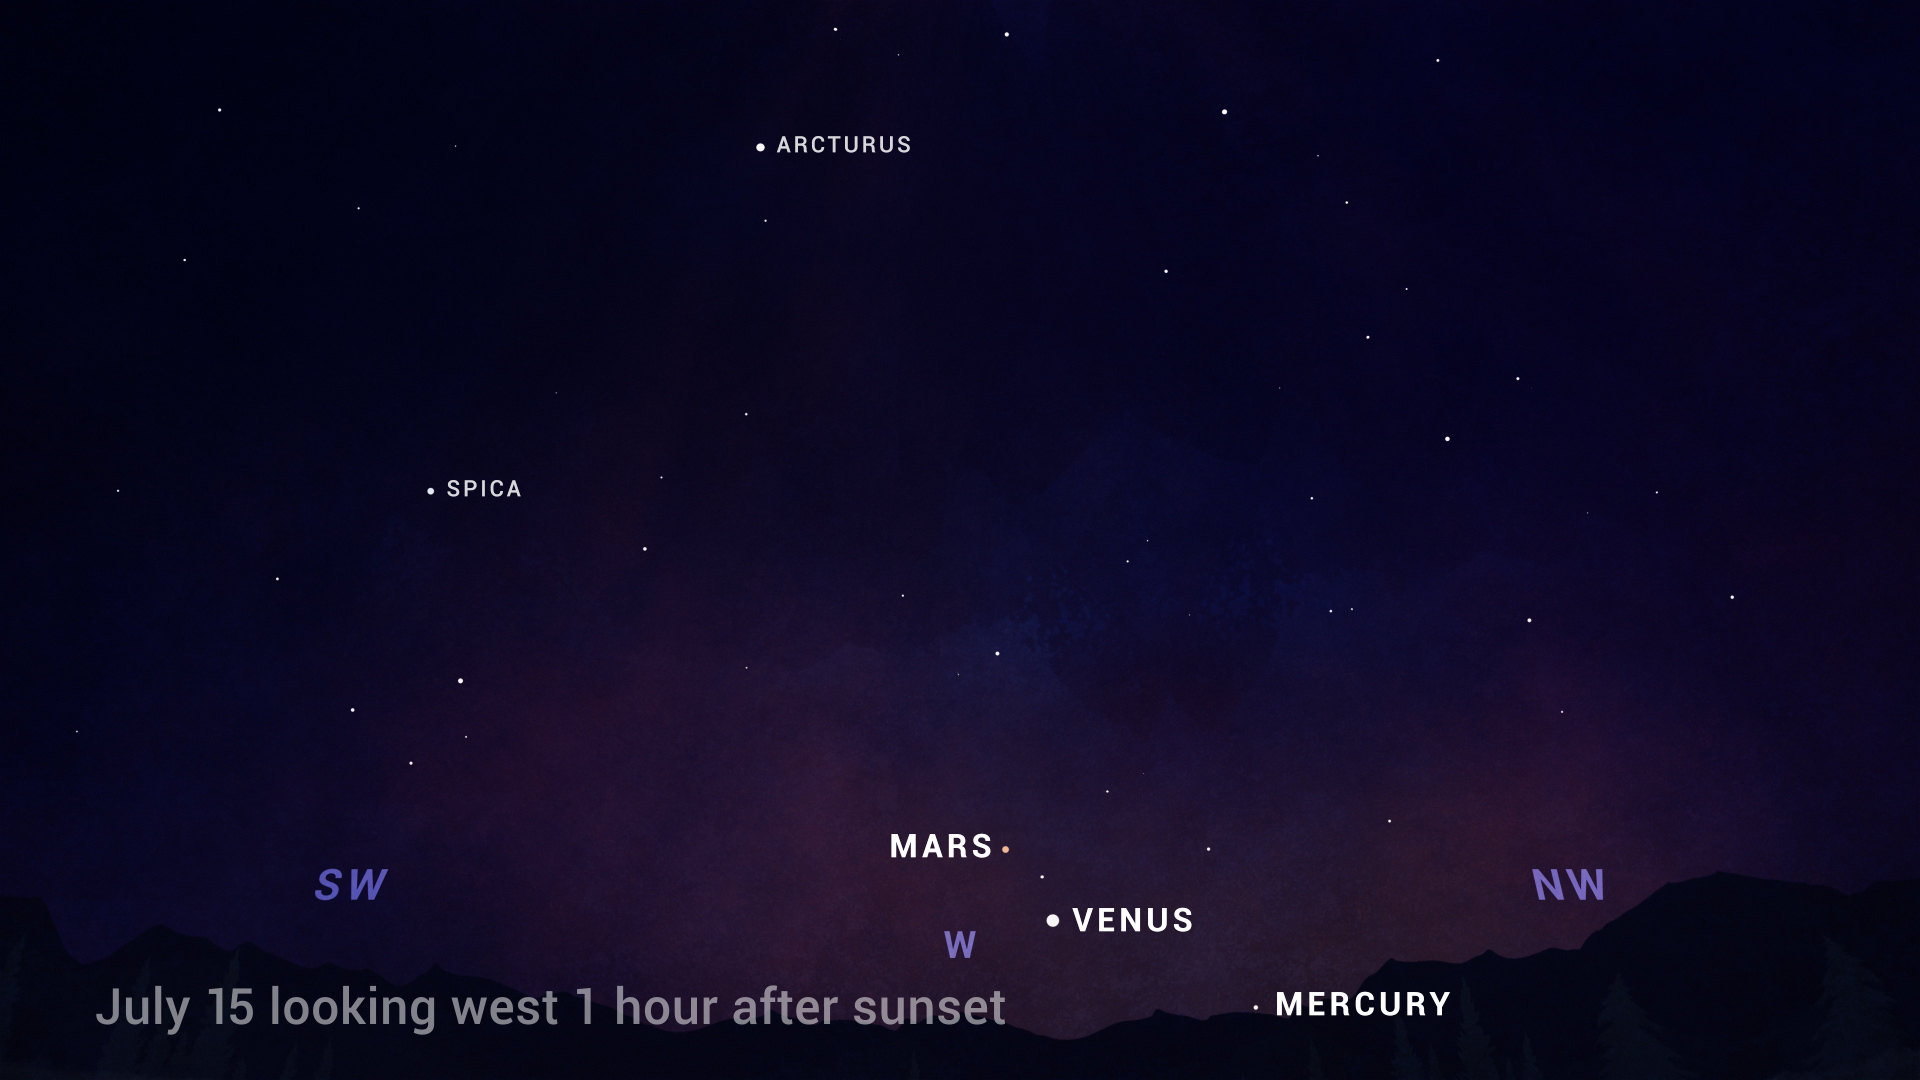 An illustrated sky chart shows the evening sky facing west, one hour after sunset in July. The planets Mars and Venus are depicted as two bright, starlike dots below center, fairly low in the sky. Planet Mercury is also labeled here at lower right, indicating it is extremely close to the horizon.